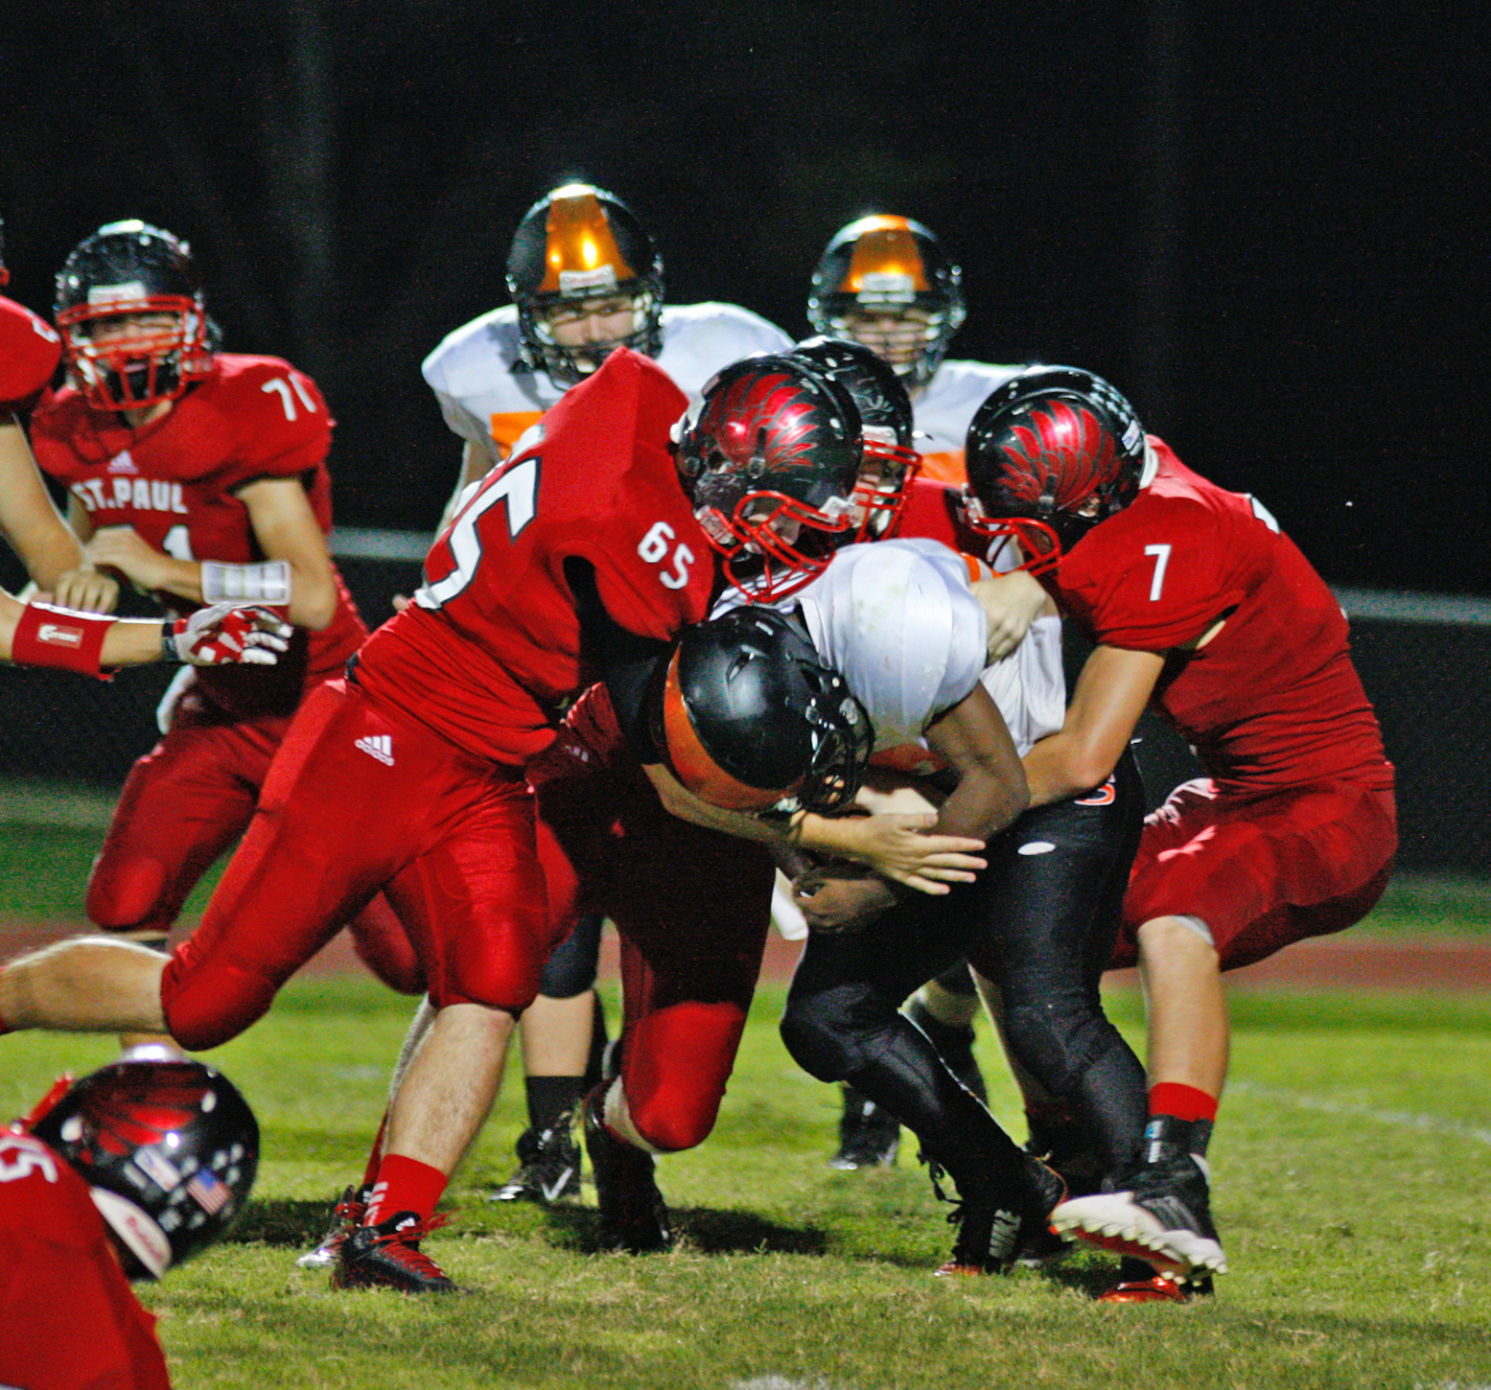 St. Paul’s defense dominated, giving up only 20 points in the Cardinals’ 76-20 win.